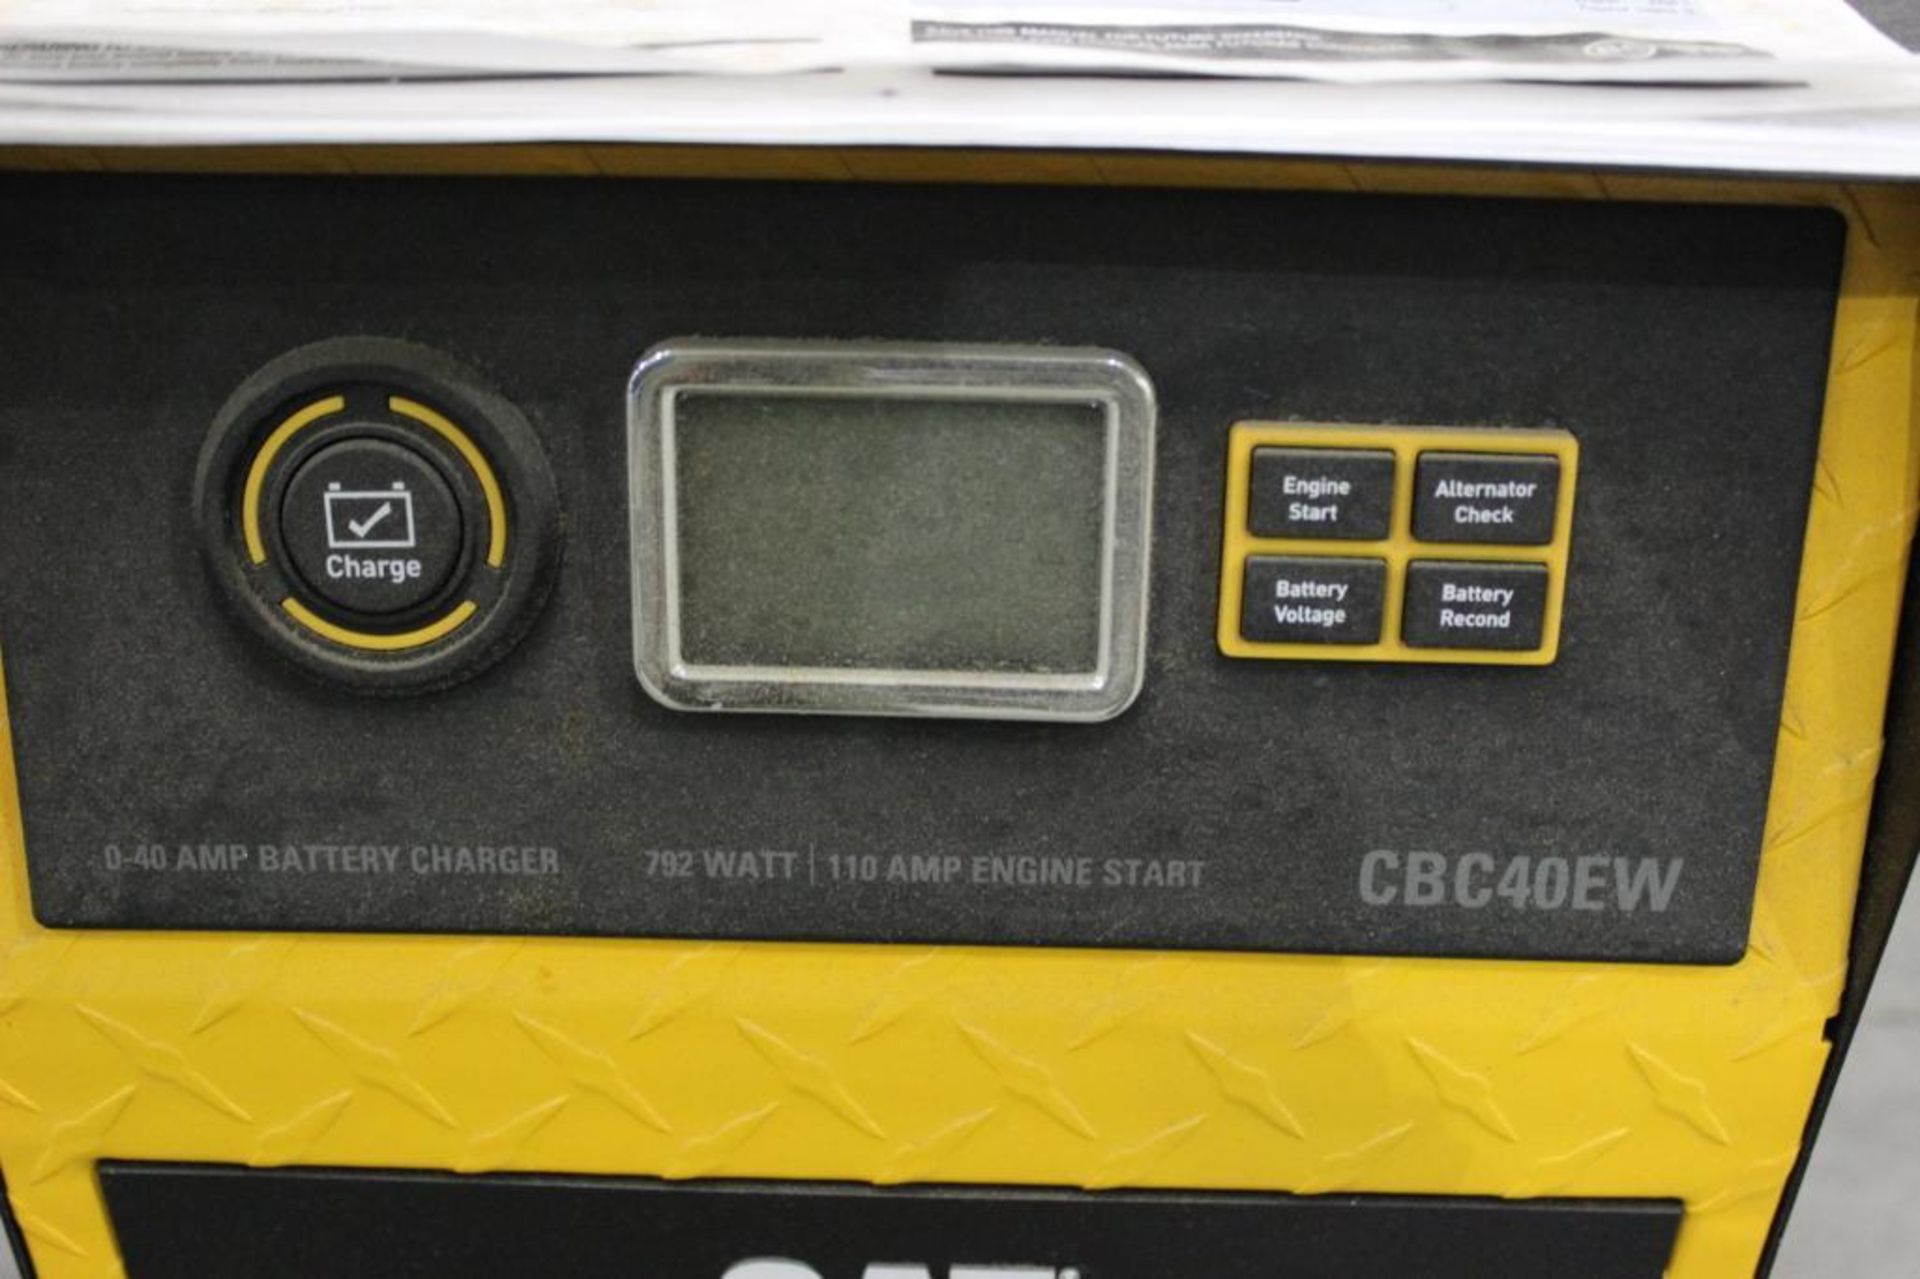 Cat model CBC40EW 40amp portable battery charger - Image 2 of 4